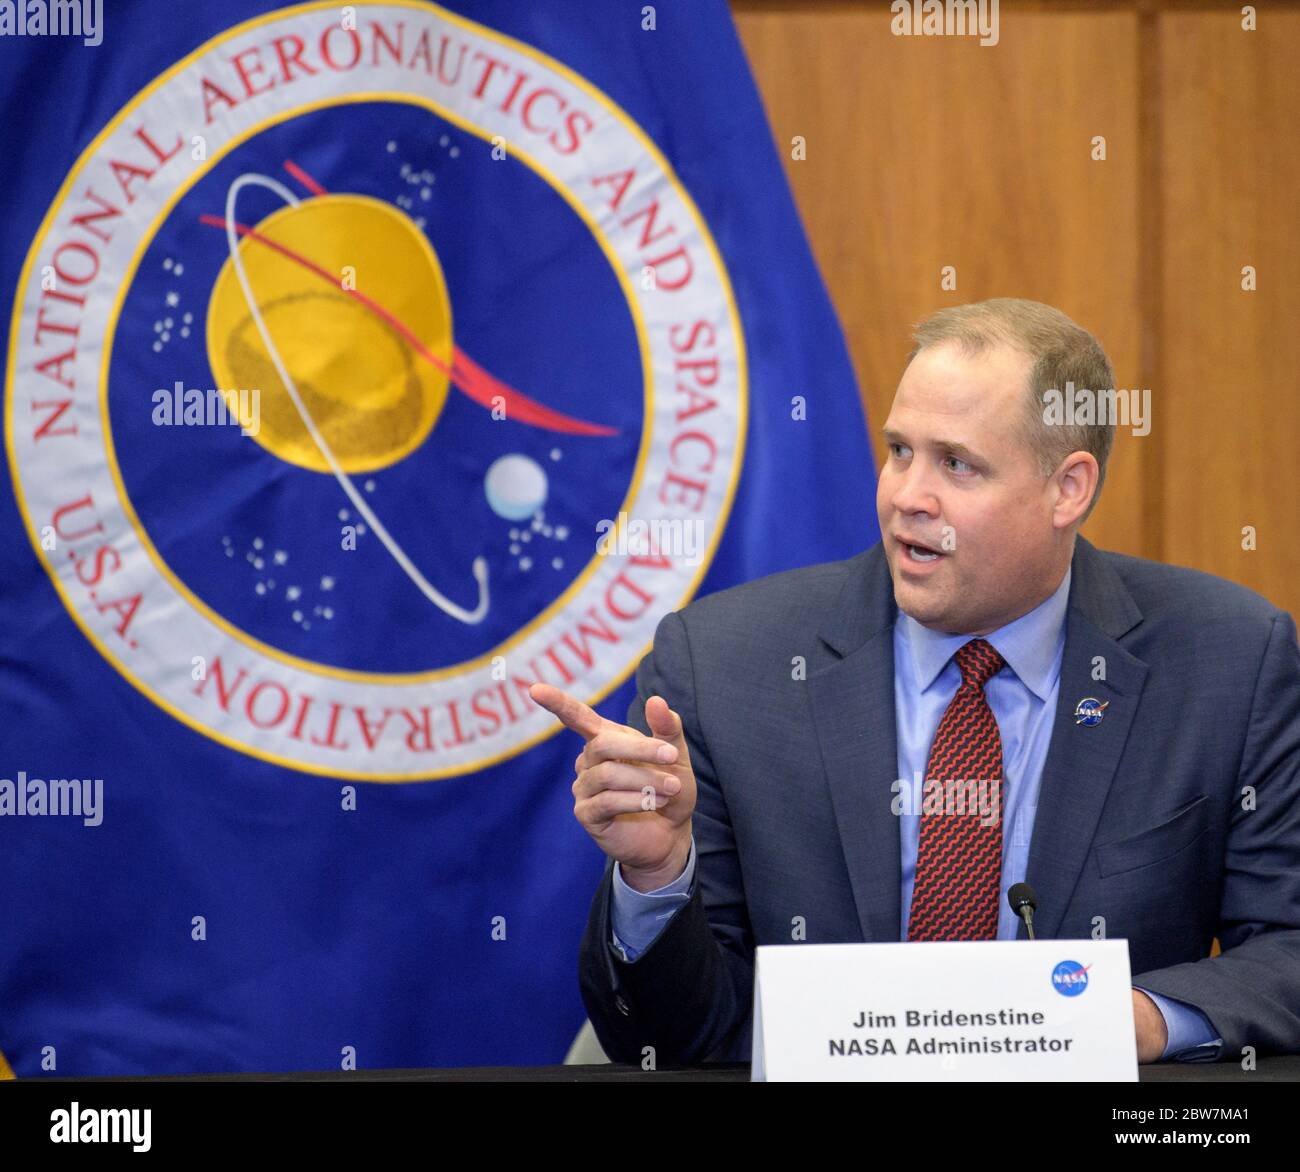 NASA Administrator Jim Bridenstine participates in a SpaceX Demonstration Mission 2 Launch Briefing at the Neil Armstrong Operations and Checkout Building following the departure of NASA astronauts Robert Behnken and Douglas Hurley for Launch Complex 39A to board a SpaceX Crew Dragon spacecraft for launch, at the Kennedy Space Center May 27, 2020 in Cape Canaveral, Florida. The mission was scrubbed 16 minutes before launch due to weather and will try again on the 30th. Stock Photo